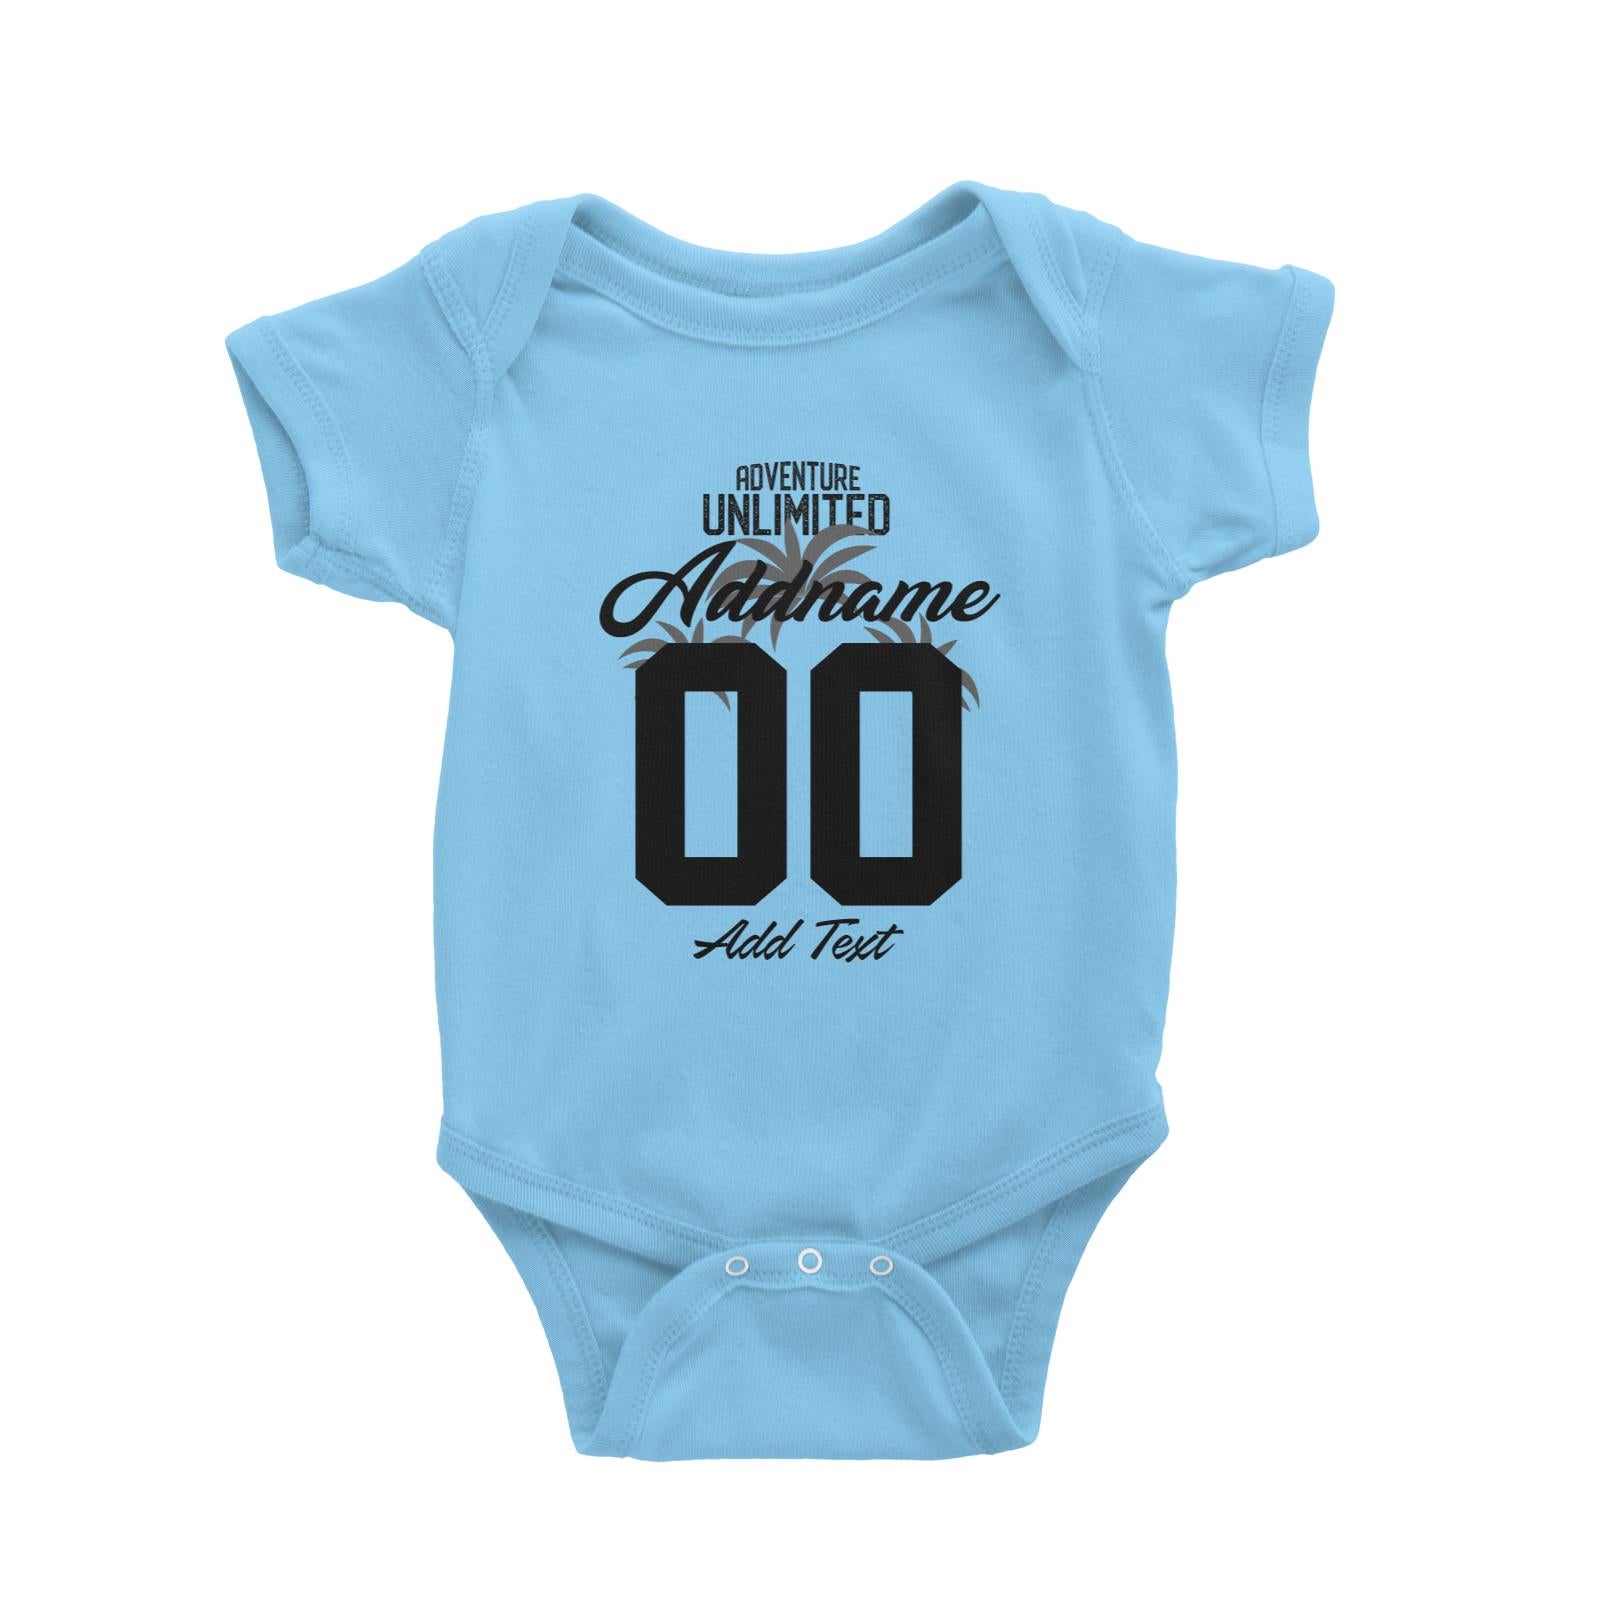 Adventure Unlimited with Grey Leaves Personalizable with Name Number and Text Baby Romper